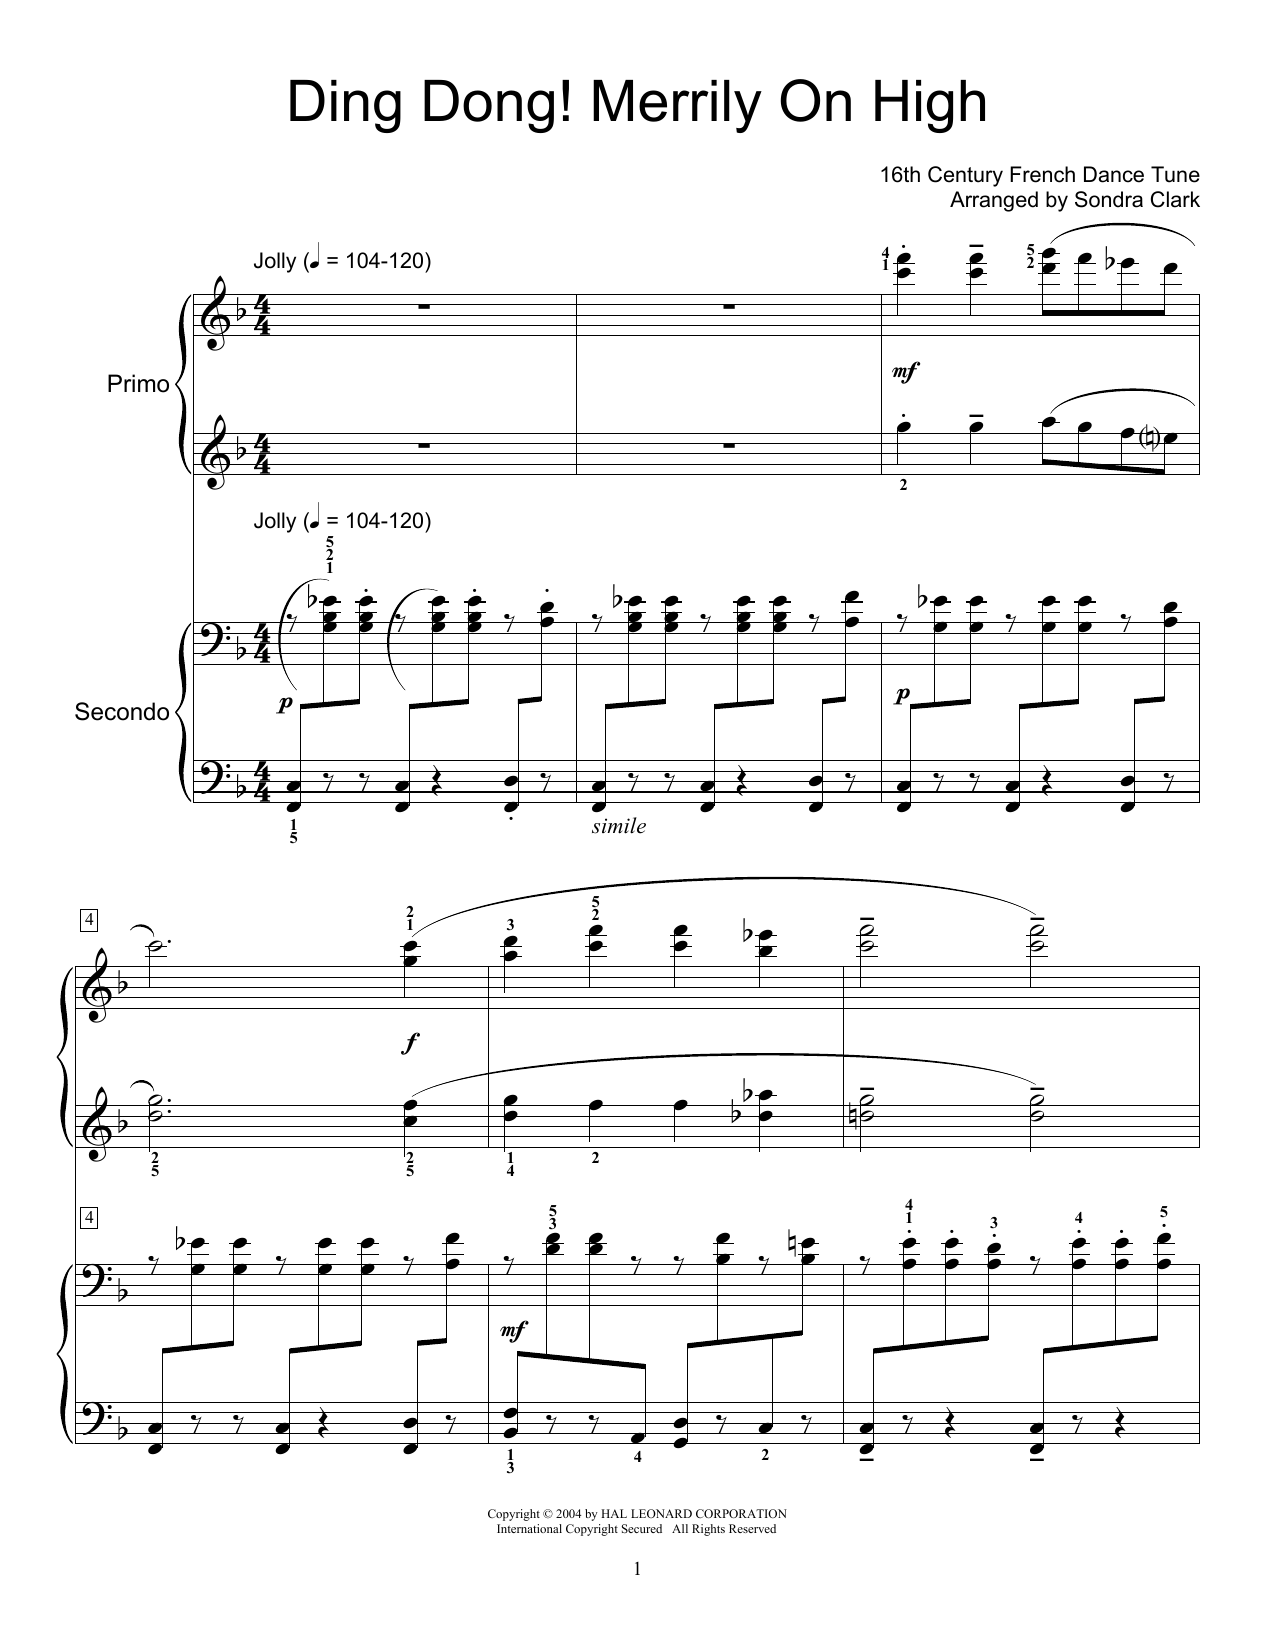 Christmas Carol Ding Dong! Merrily On High sheet music notes and chords. Download Printable PDF.